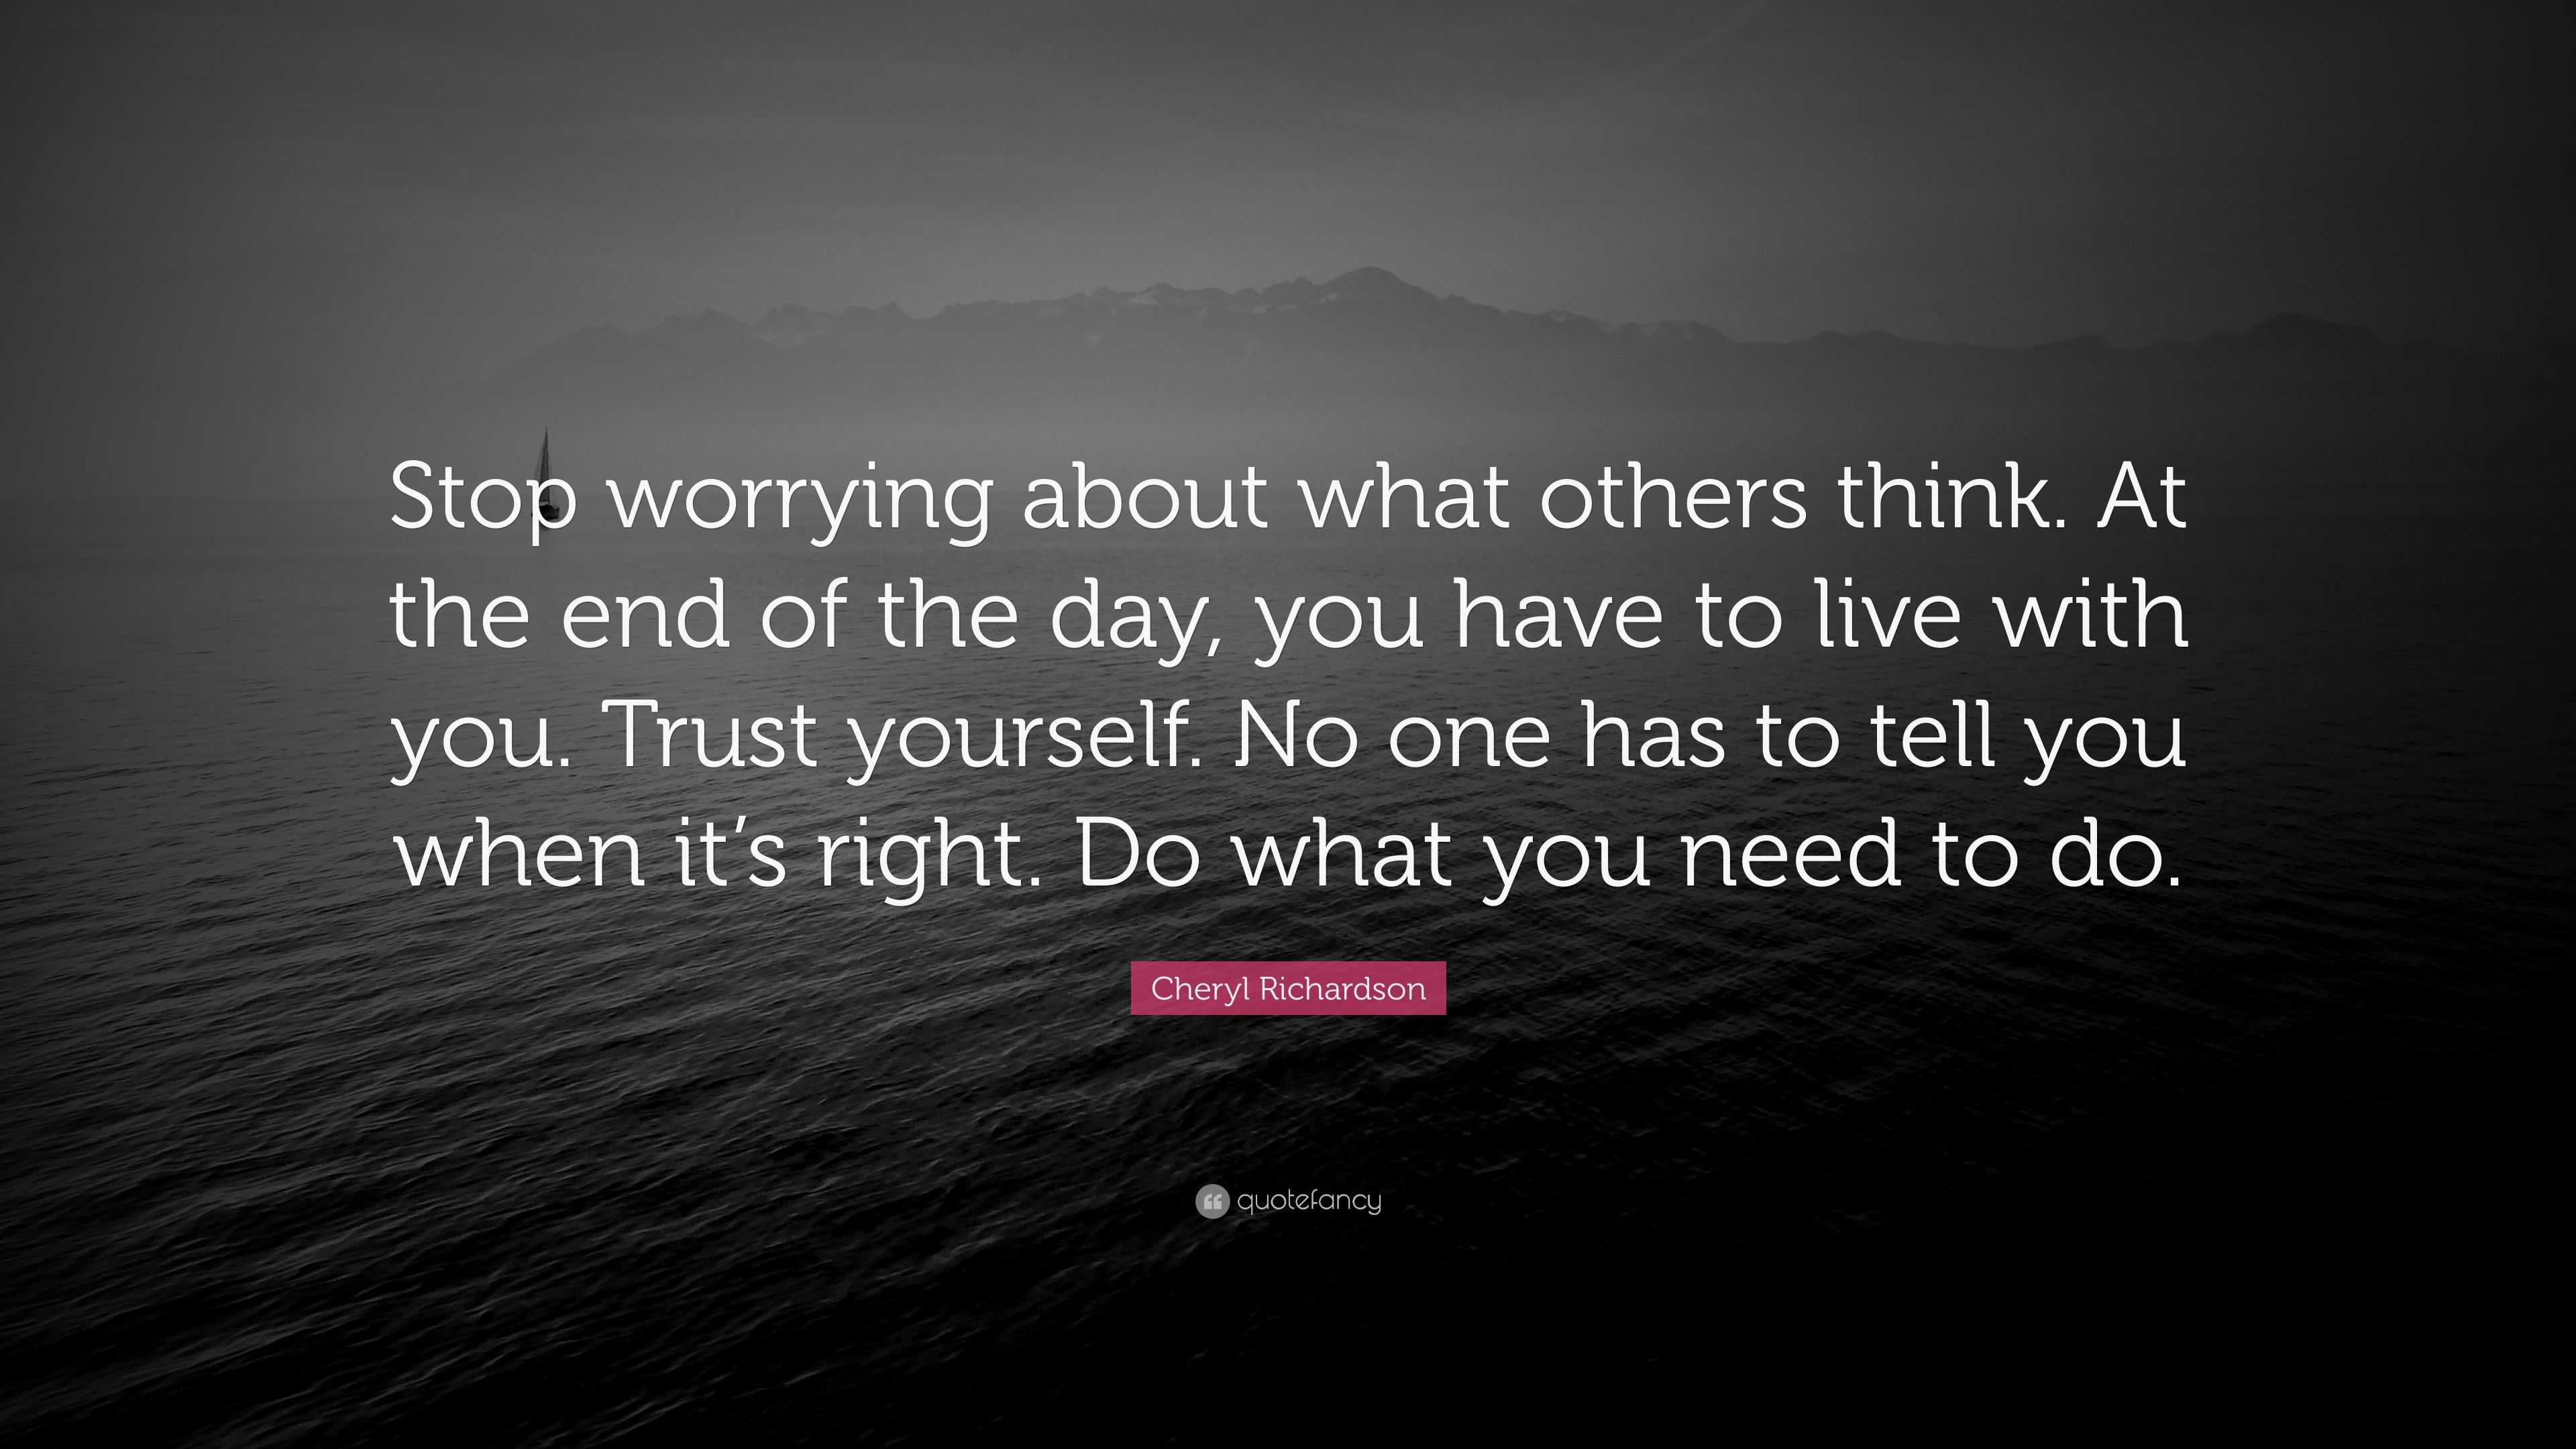 Cheryl Richardson Quote “Stop worrying about what others